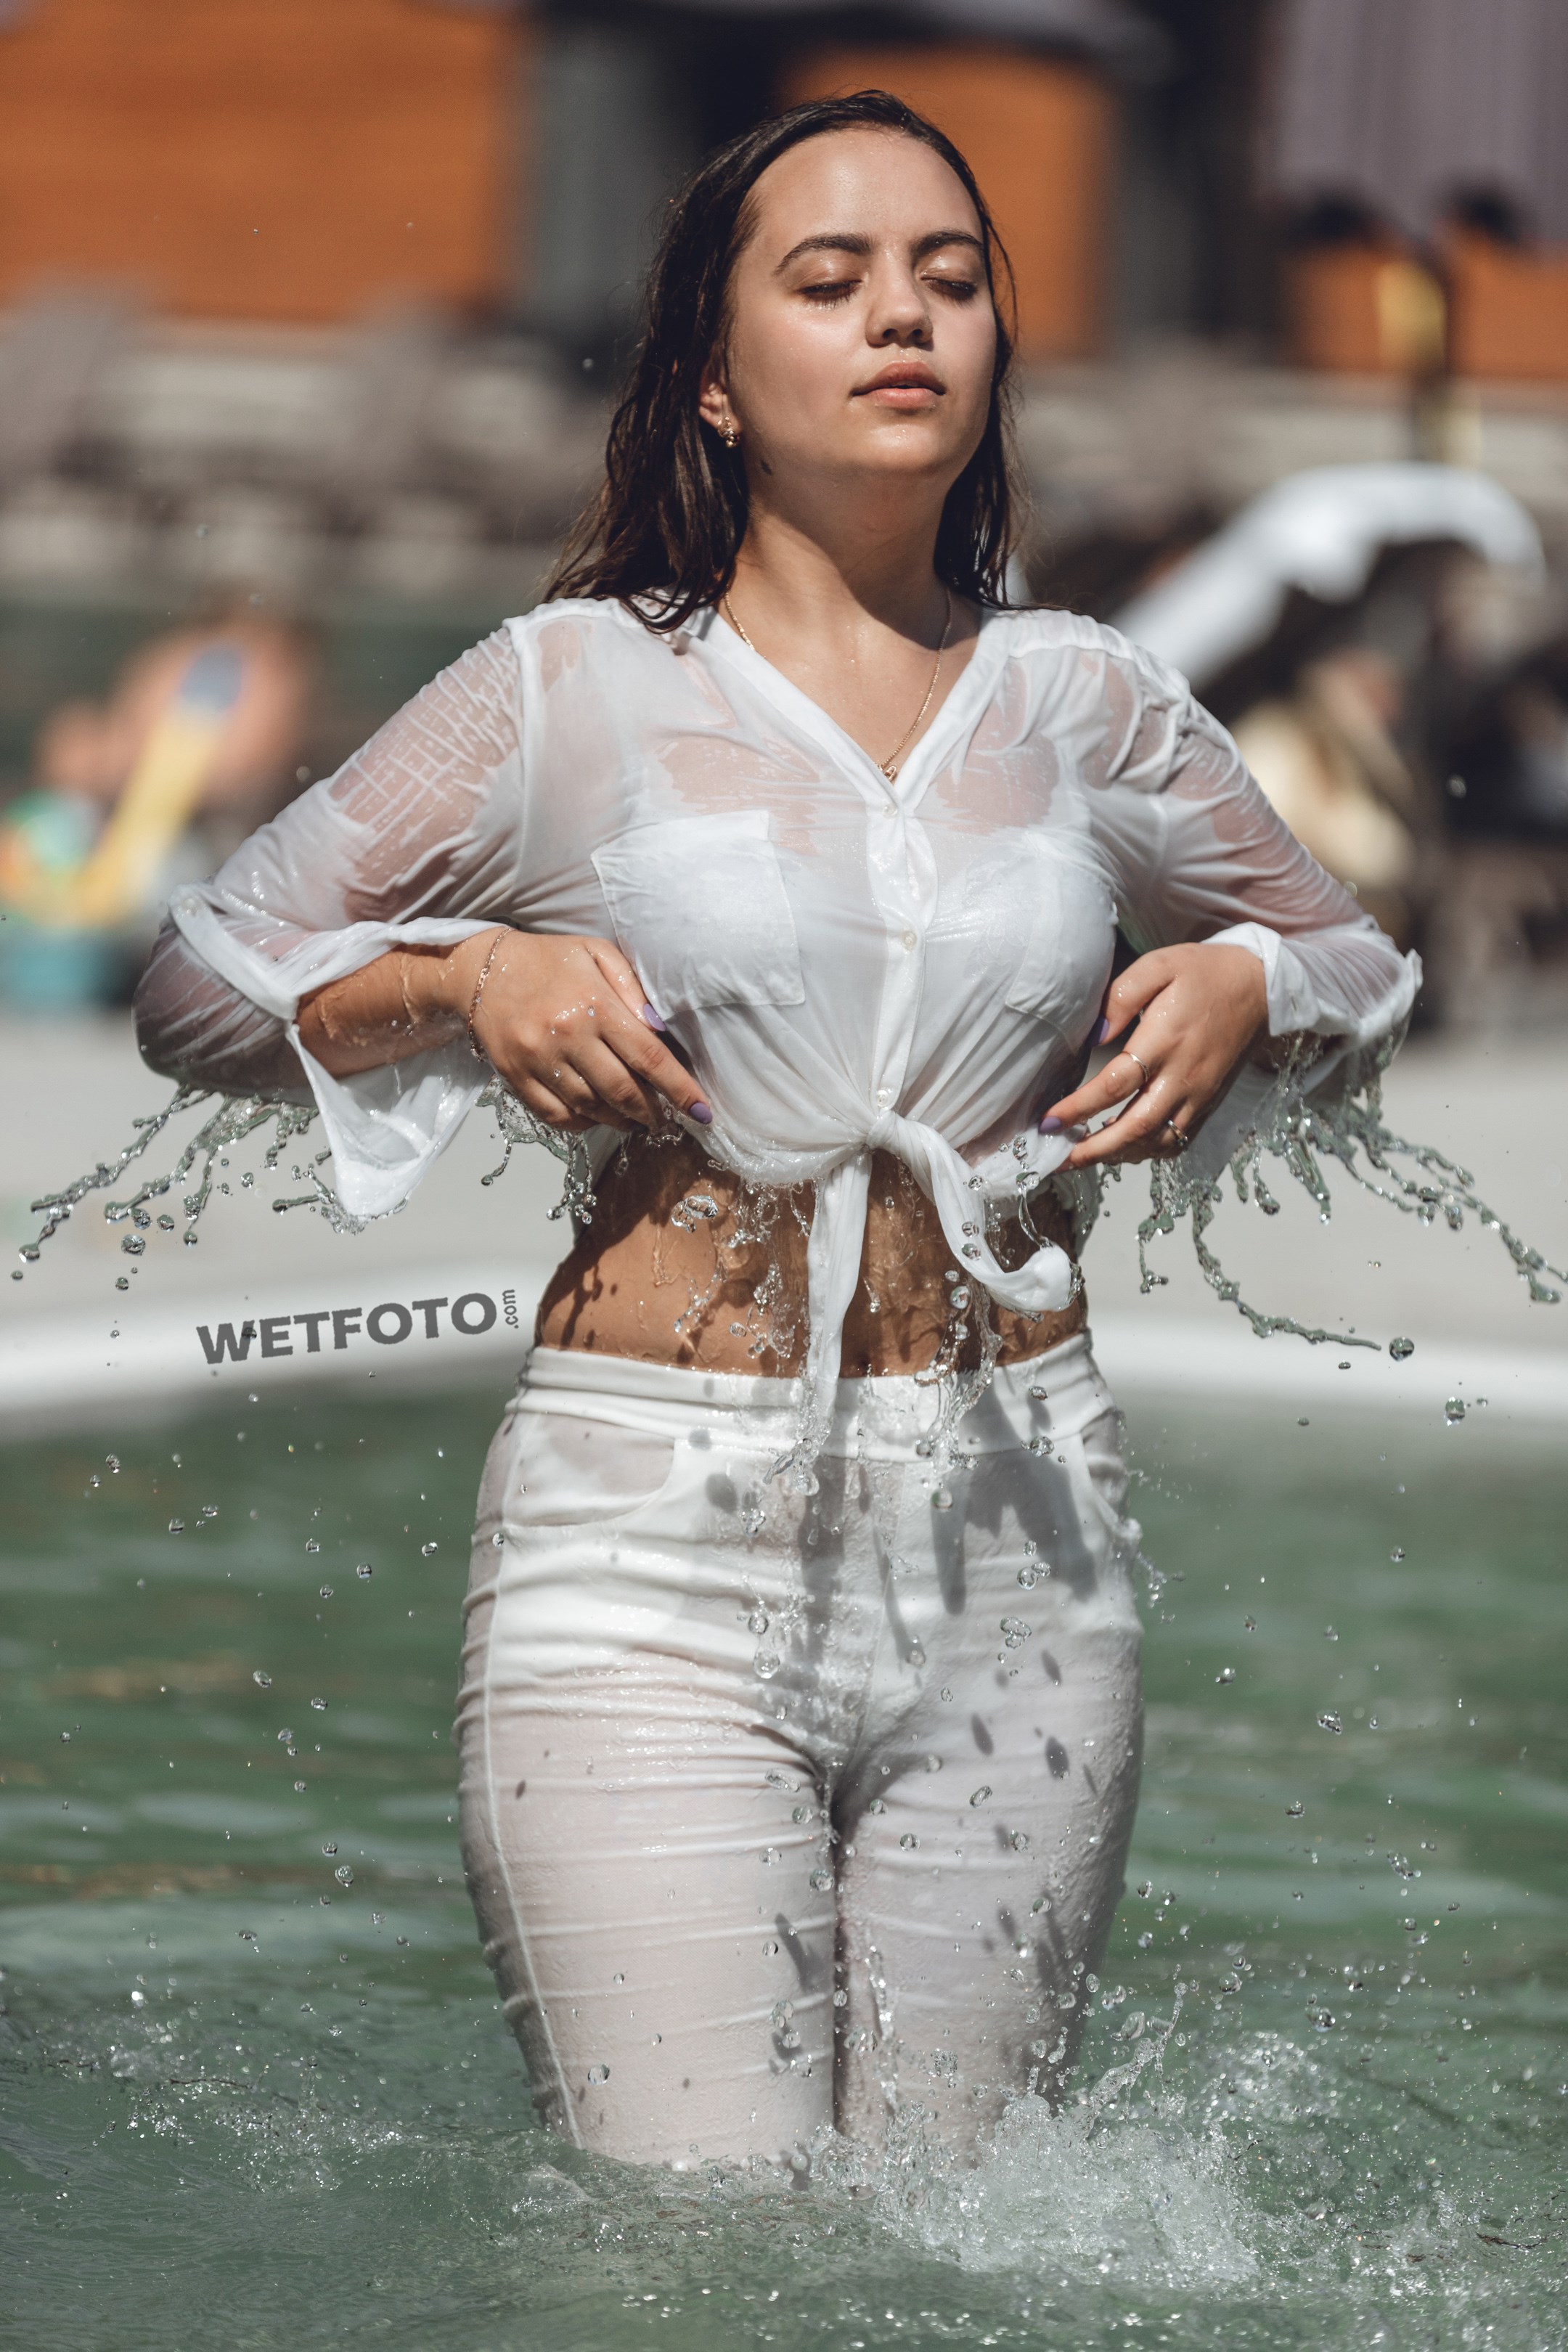 http://wetlook.one/wetlook/fully-clothed-girl-in-white-jeans-and-shirt-get-...